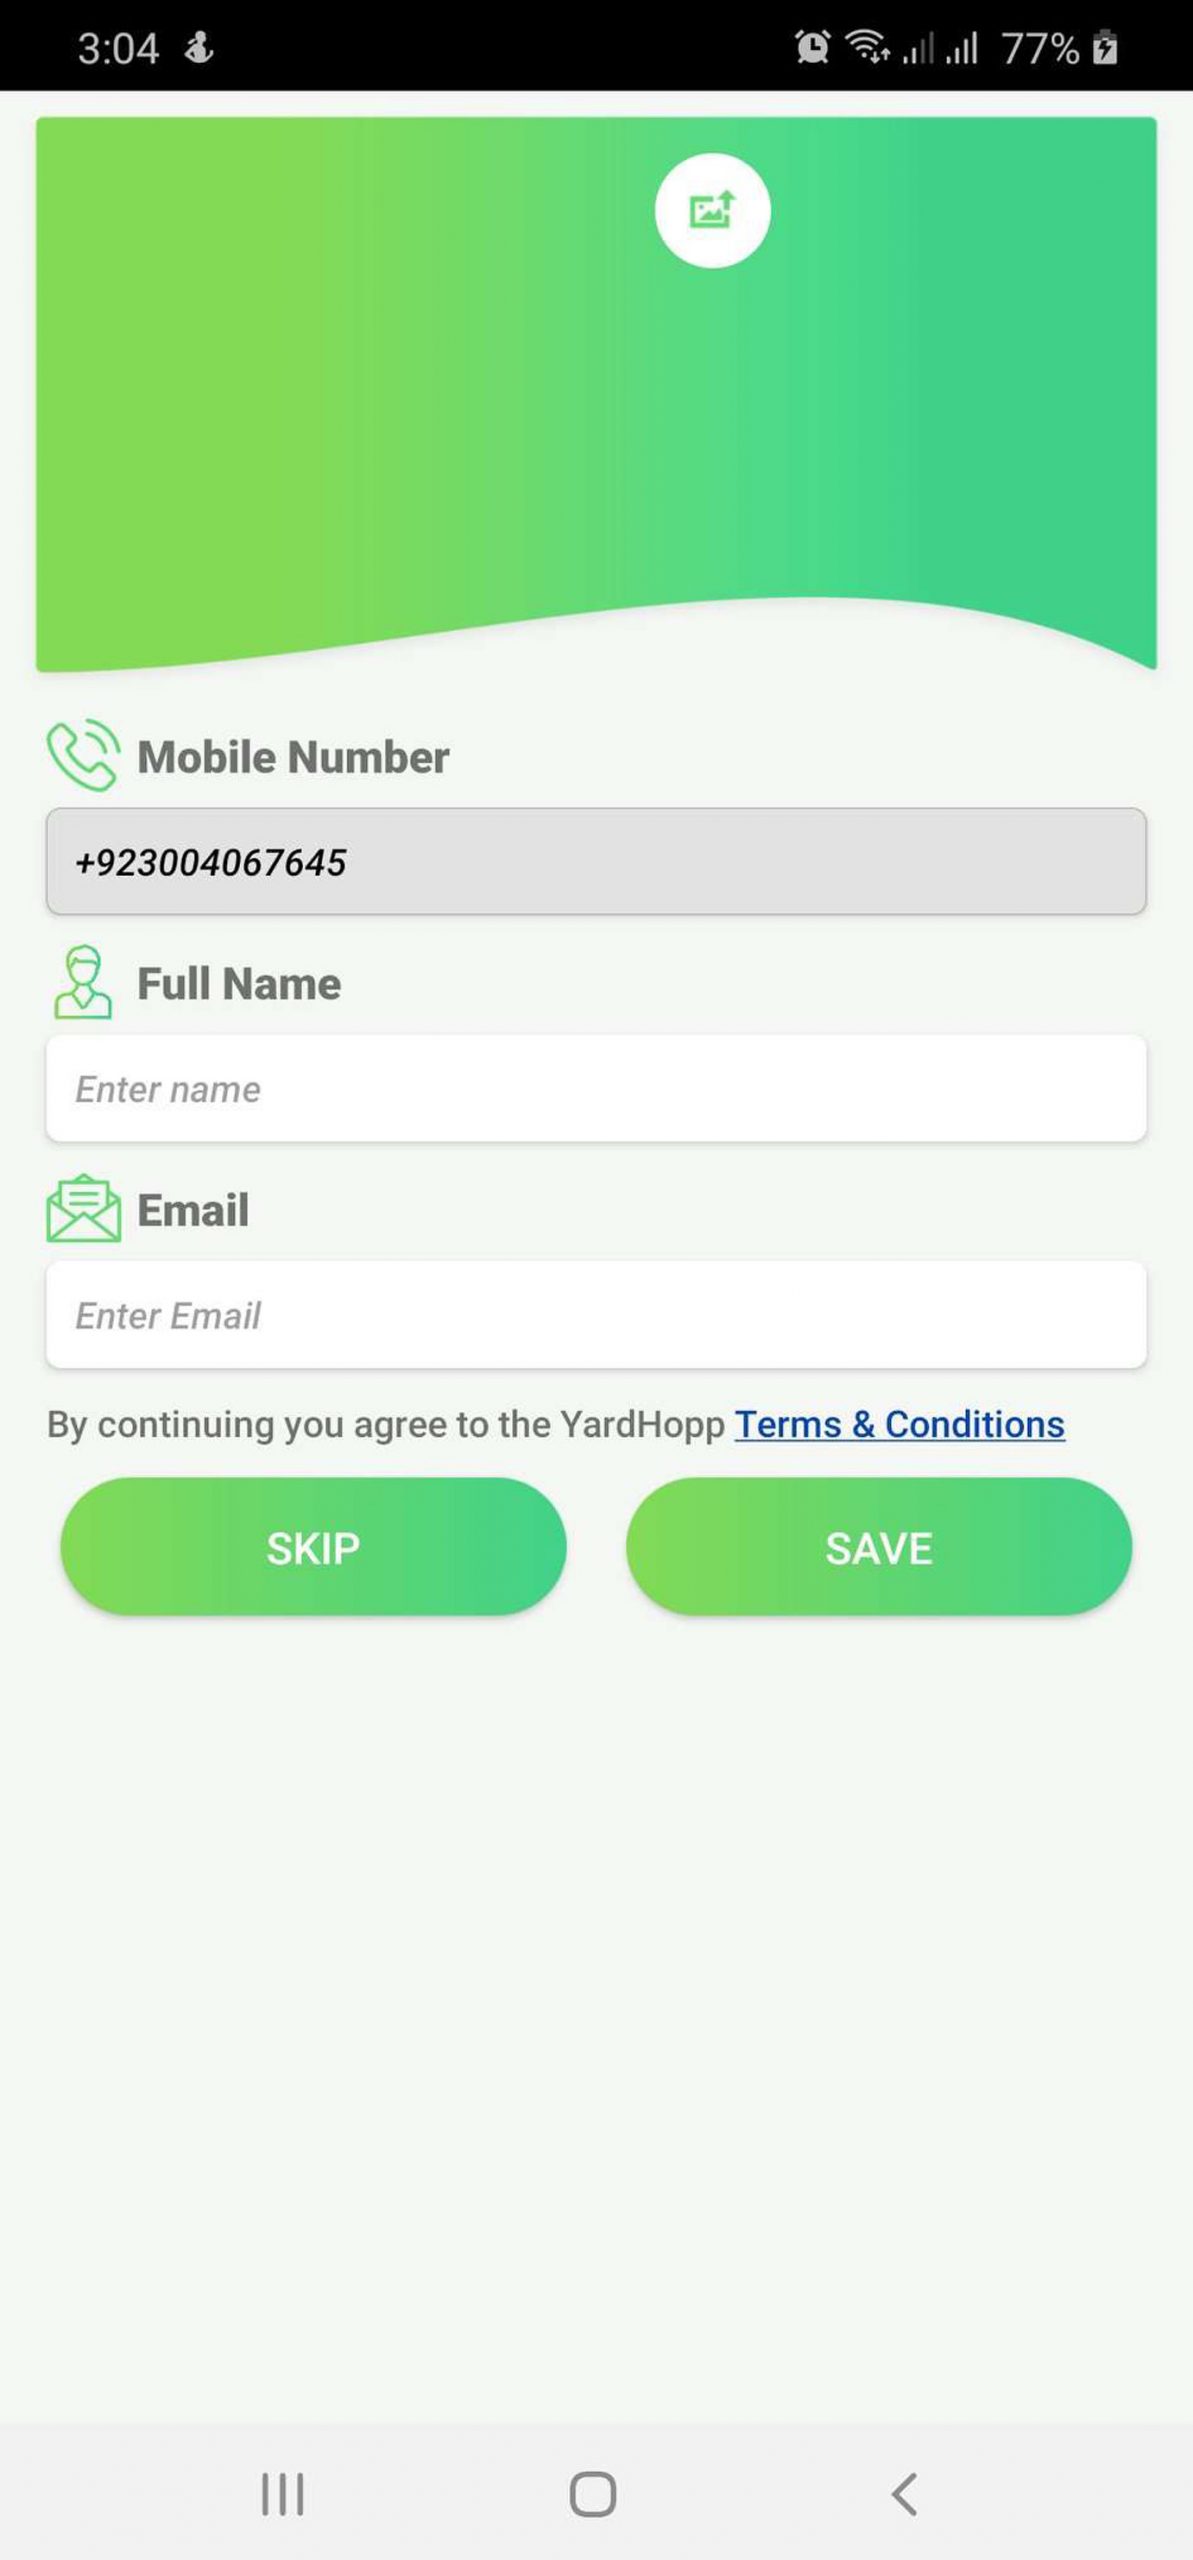 Yardhopp App Account creation detail page on mobile screen